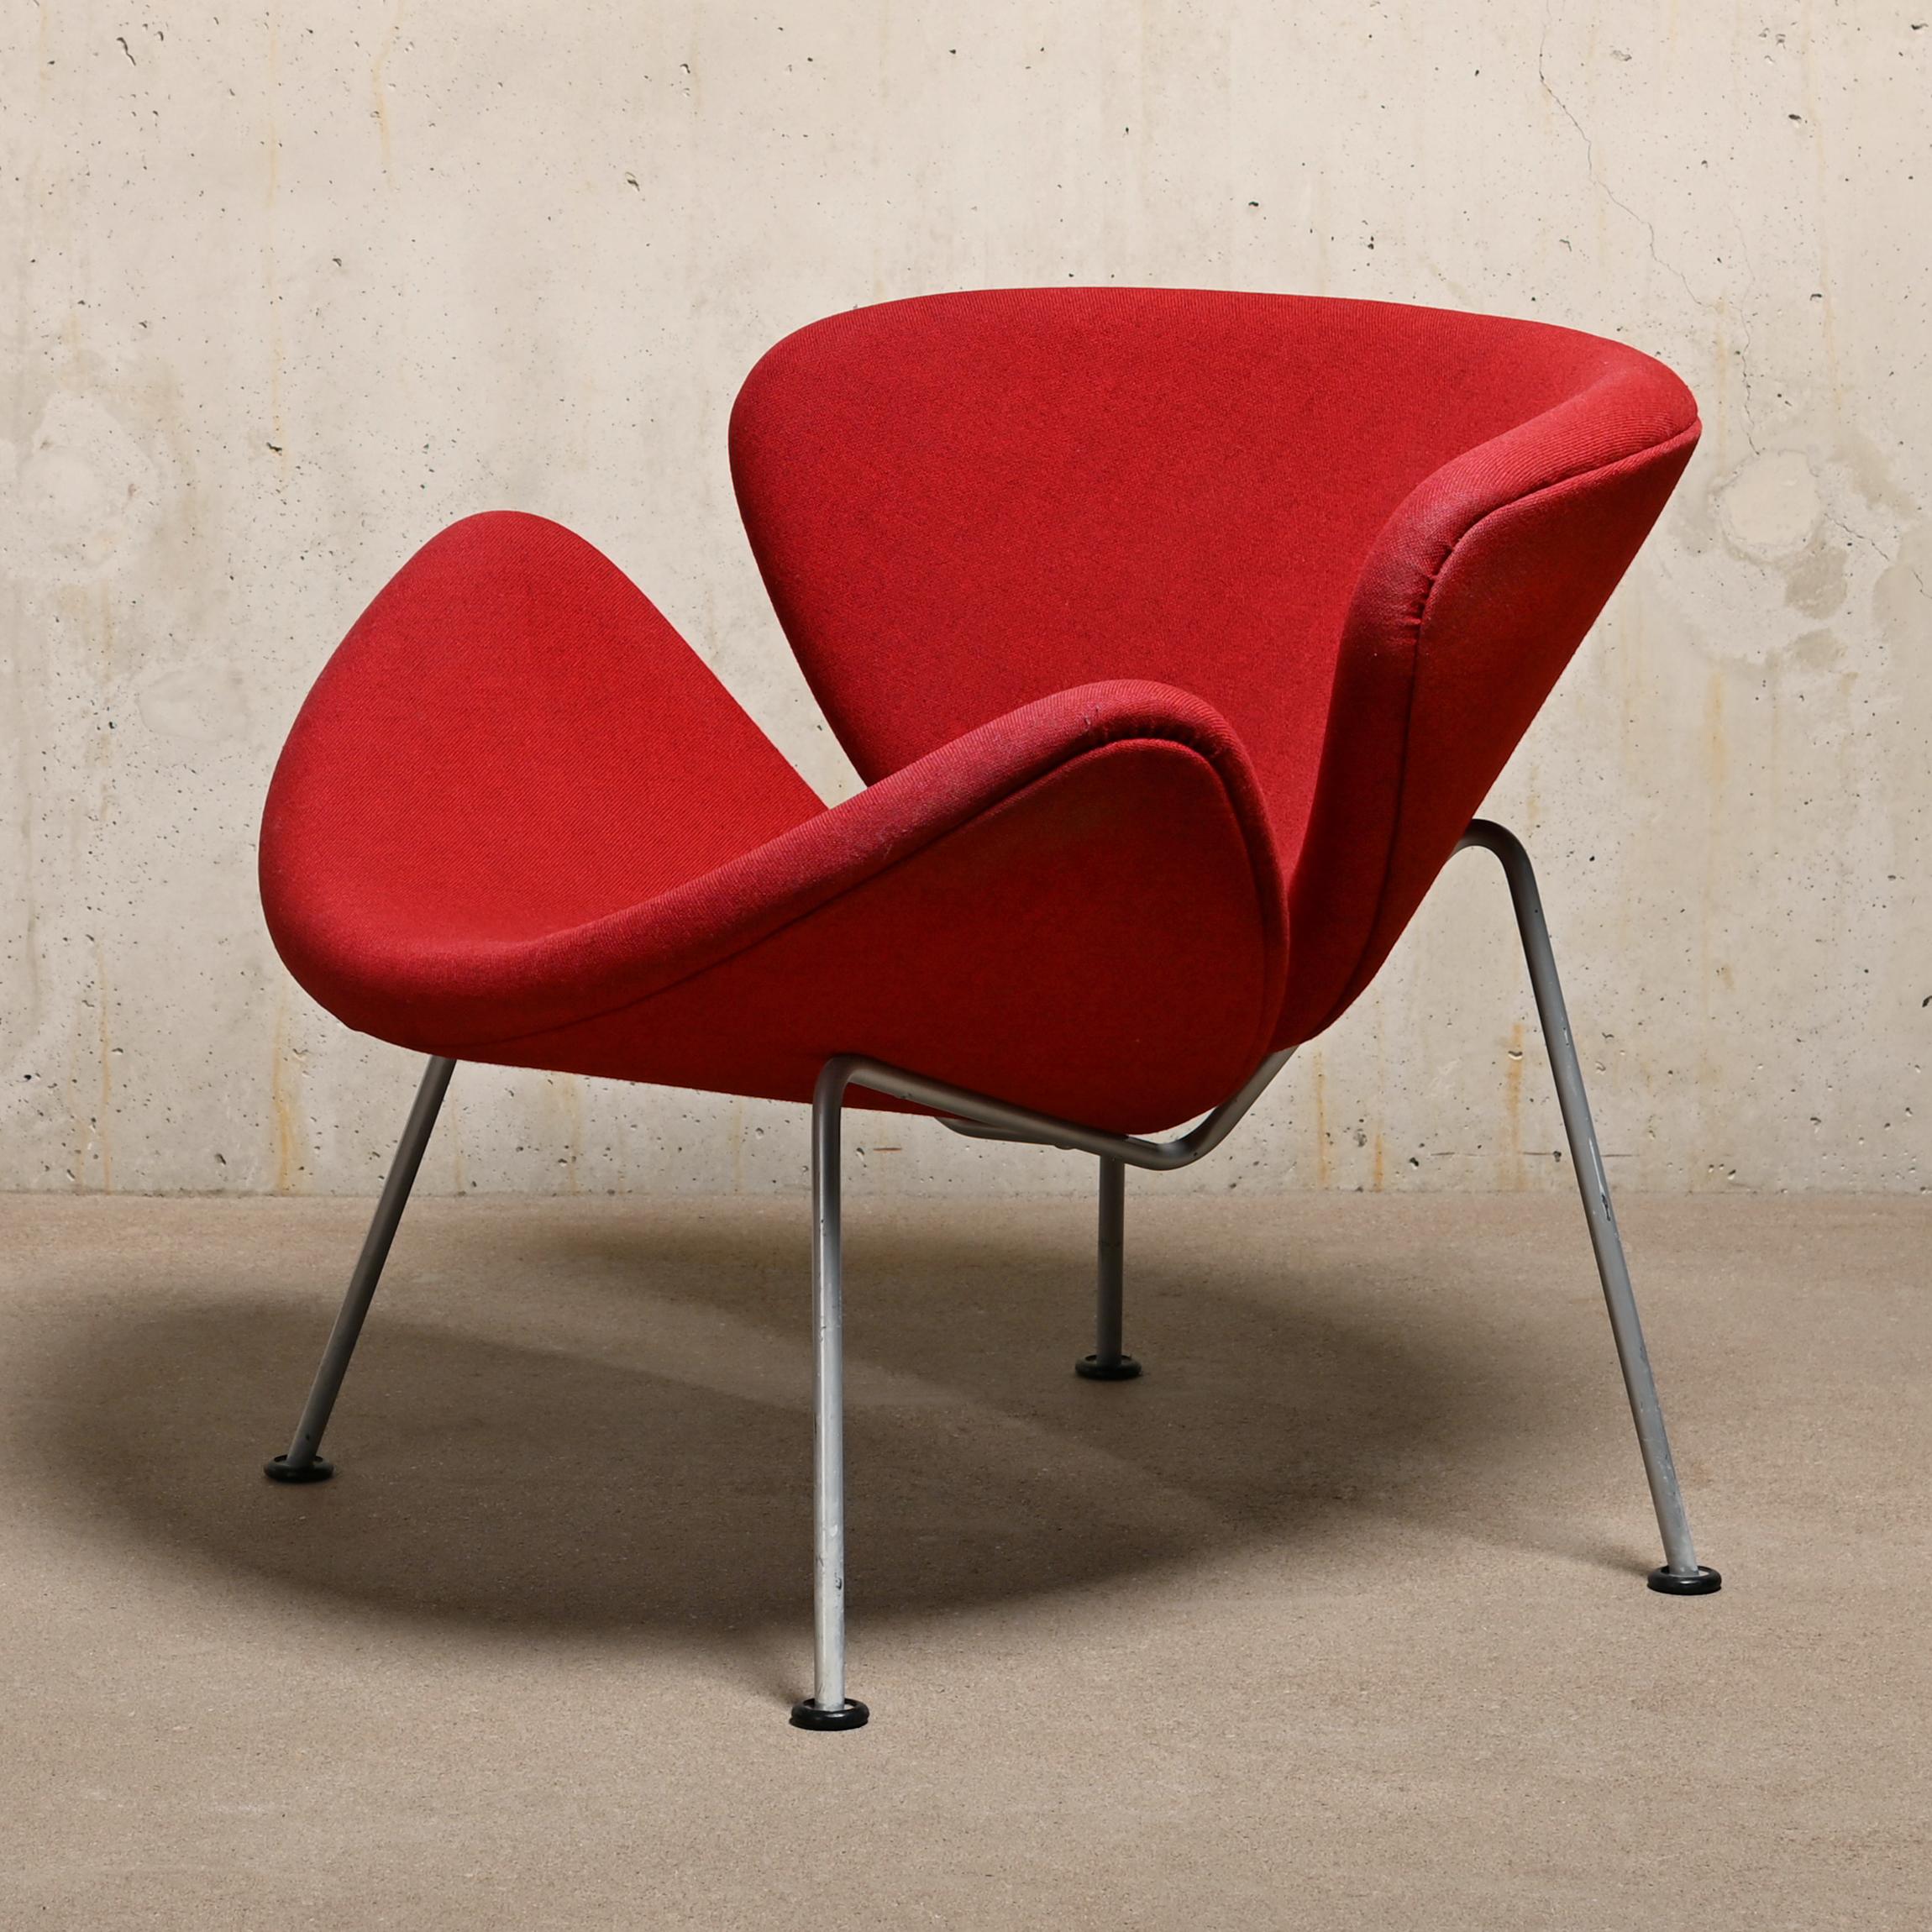 Mid-20th Century Early Pierre Paulin 'Orange Slice' Chair in Red Fabric by Artifort, Netherlands For Sale